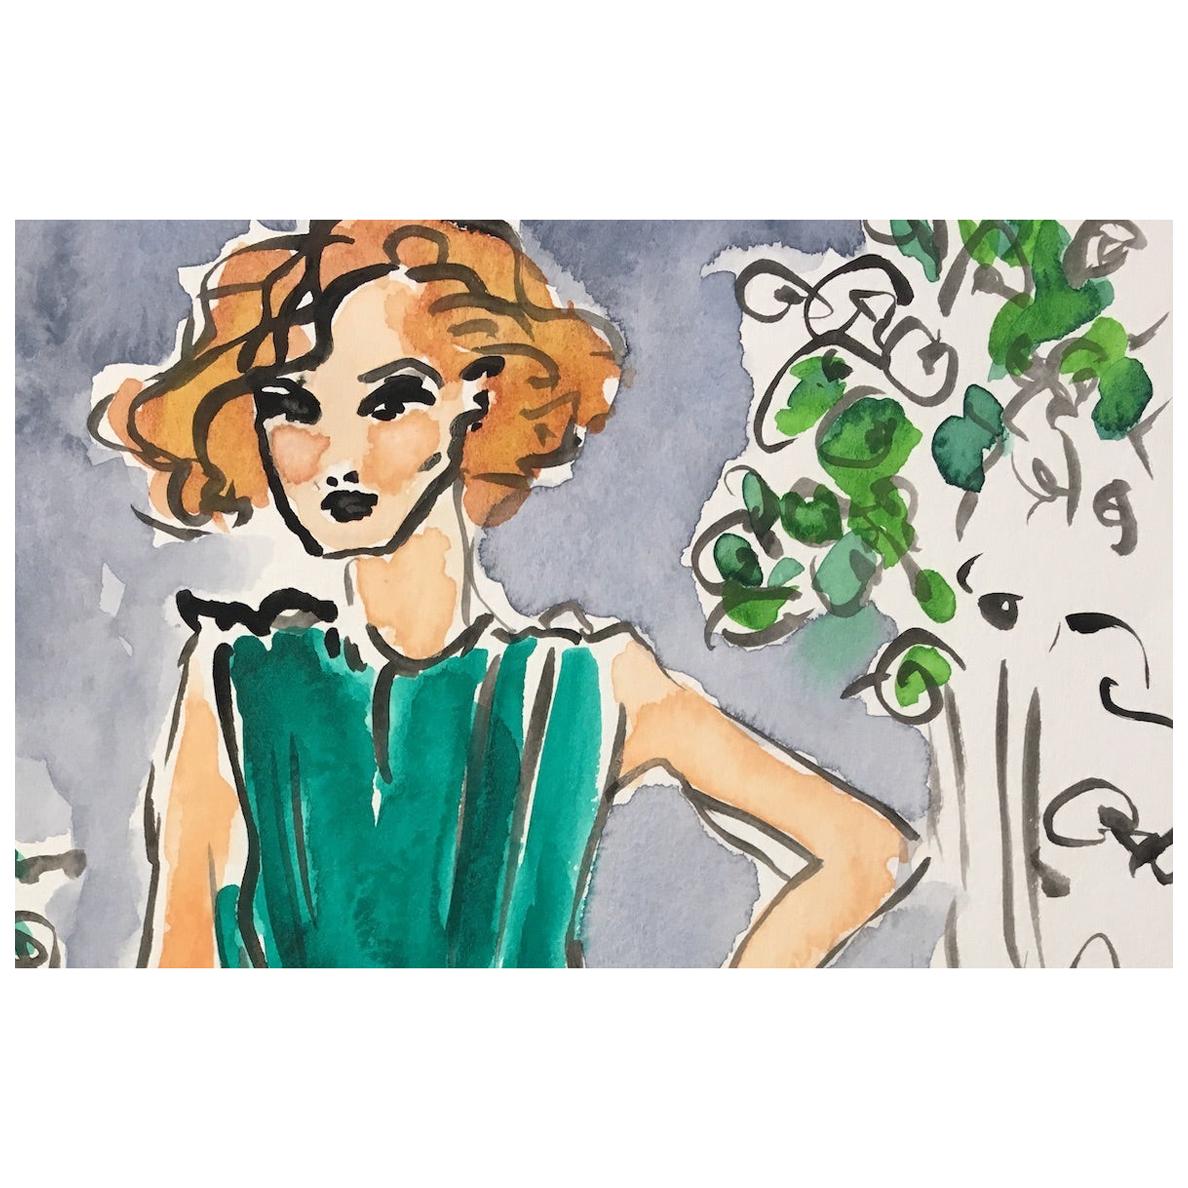 Green dress, 2018 by Manuel Santelices
One of a kind, watercolor on paper
Signed by the artist.
Image size: 10 in. H x 7 in. W
Unframed 

Manuel Santelices explores the world of fashion, society and pop culture through his illustrations. A